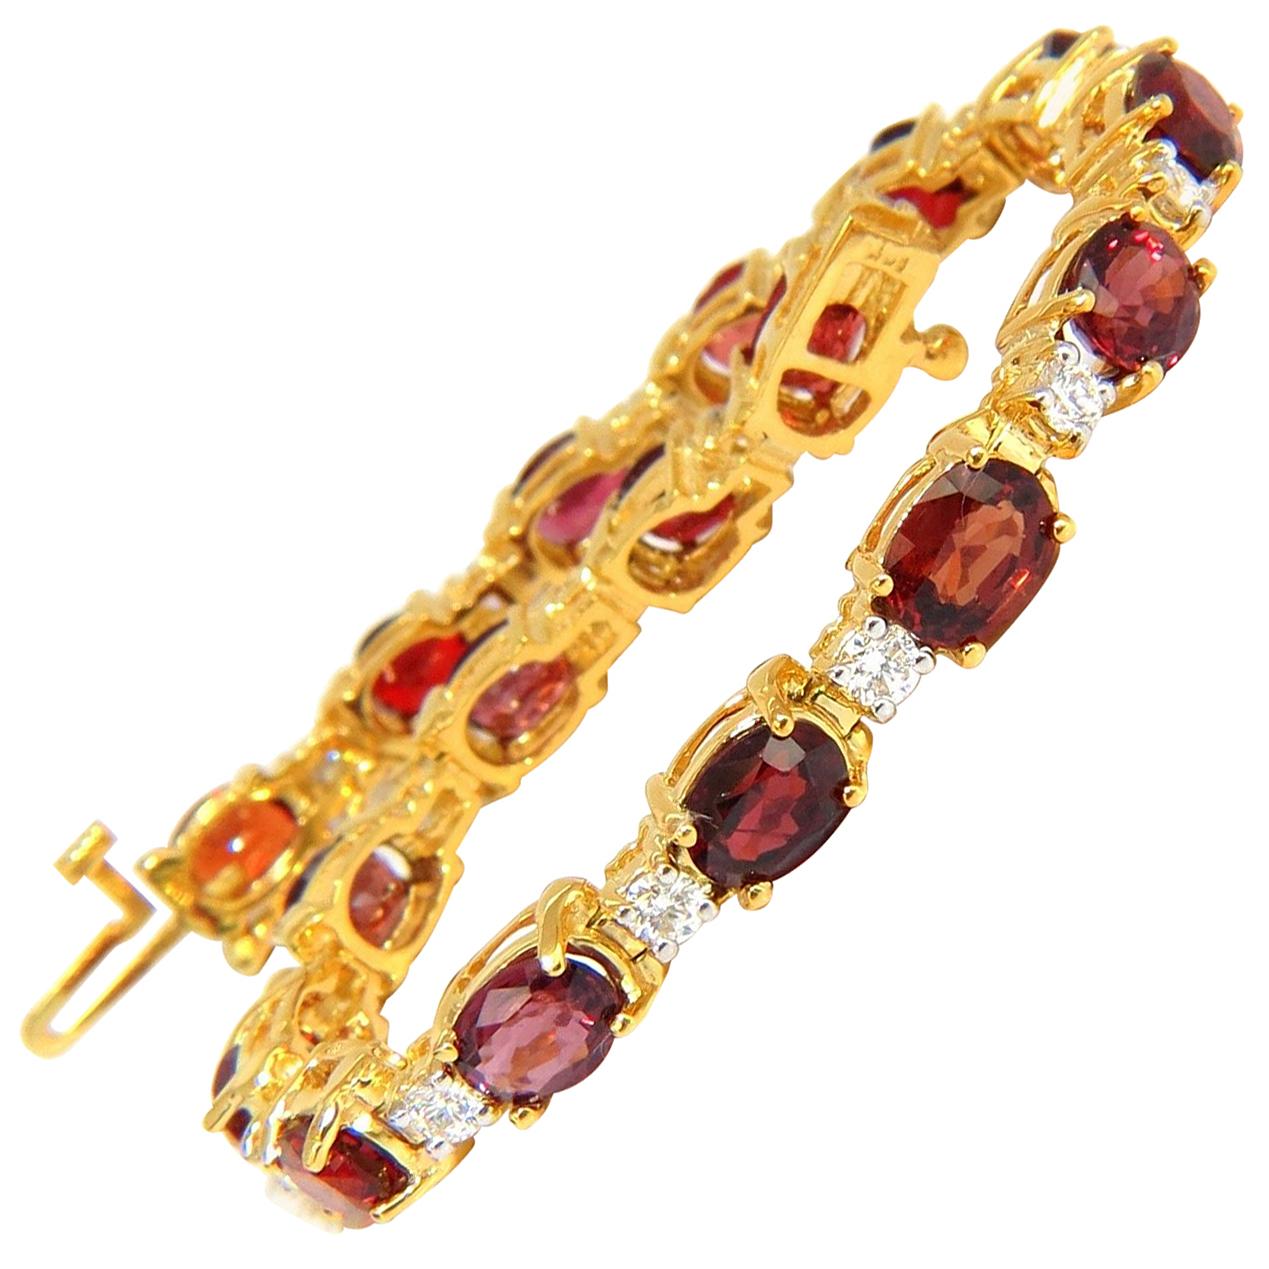 14.81ct Natural No Heat Red Spinel Diamonds Tennis Bracelet 14KT Unheated For Sale